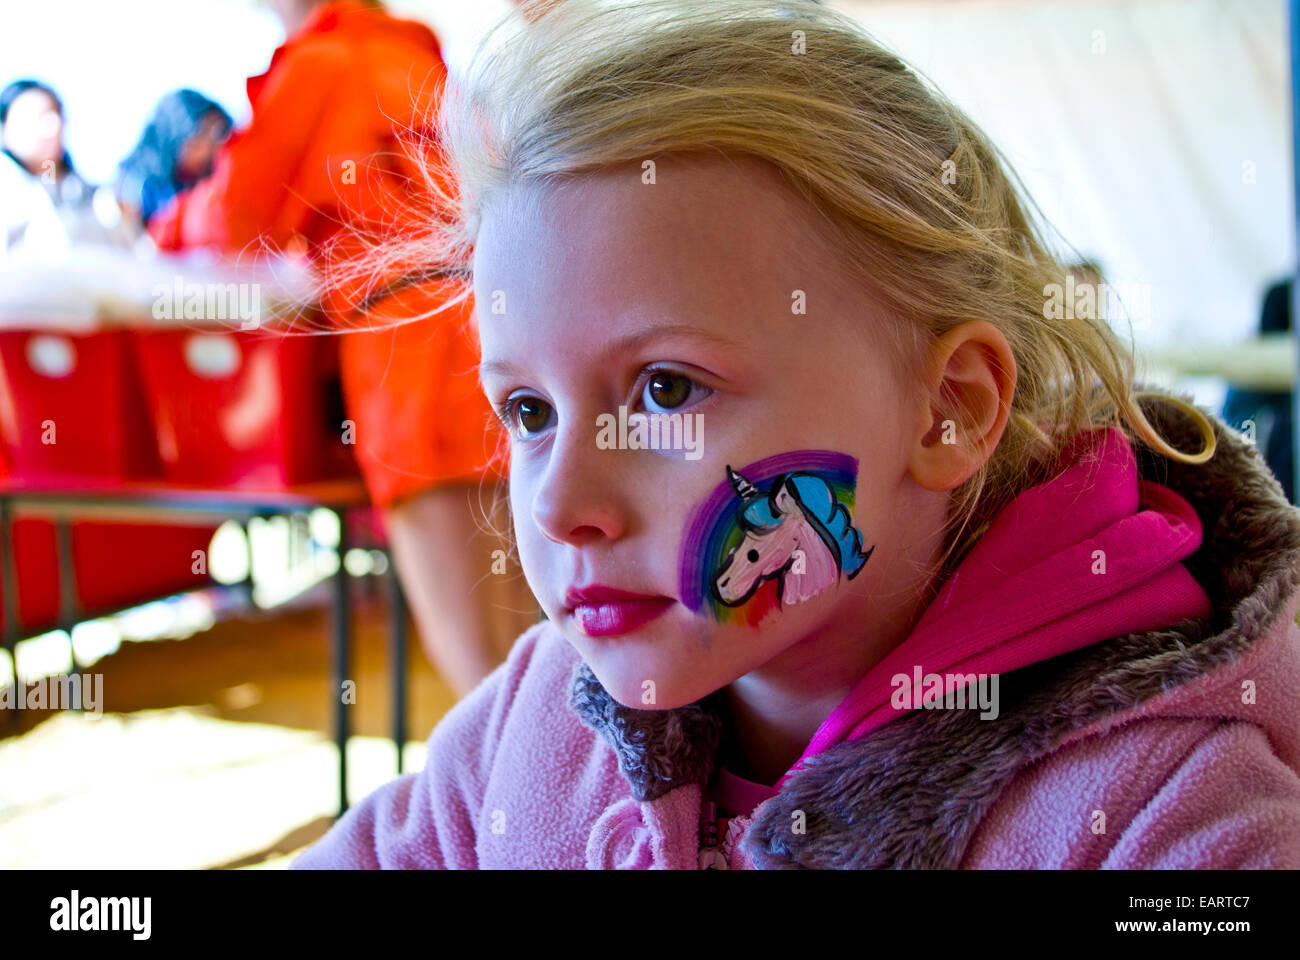 A blonde girl with a unicorn and rainbow painted on her cheek. Stock Photo